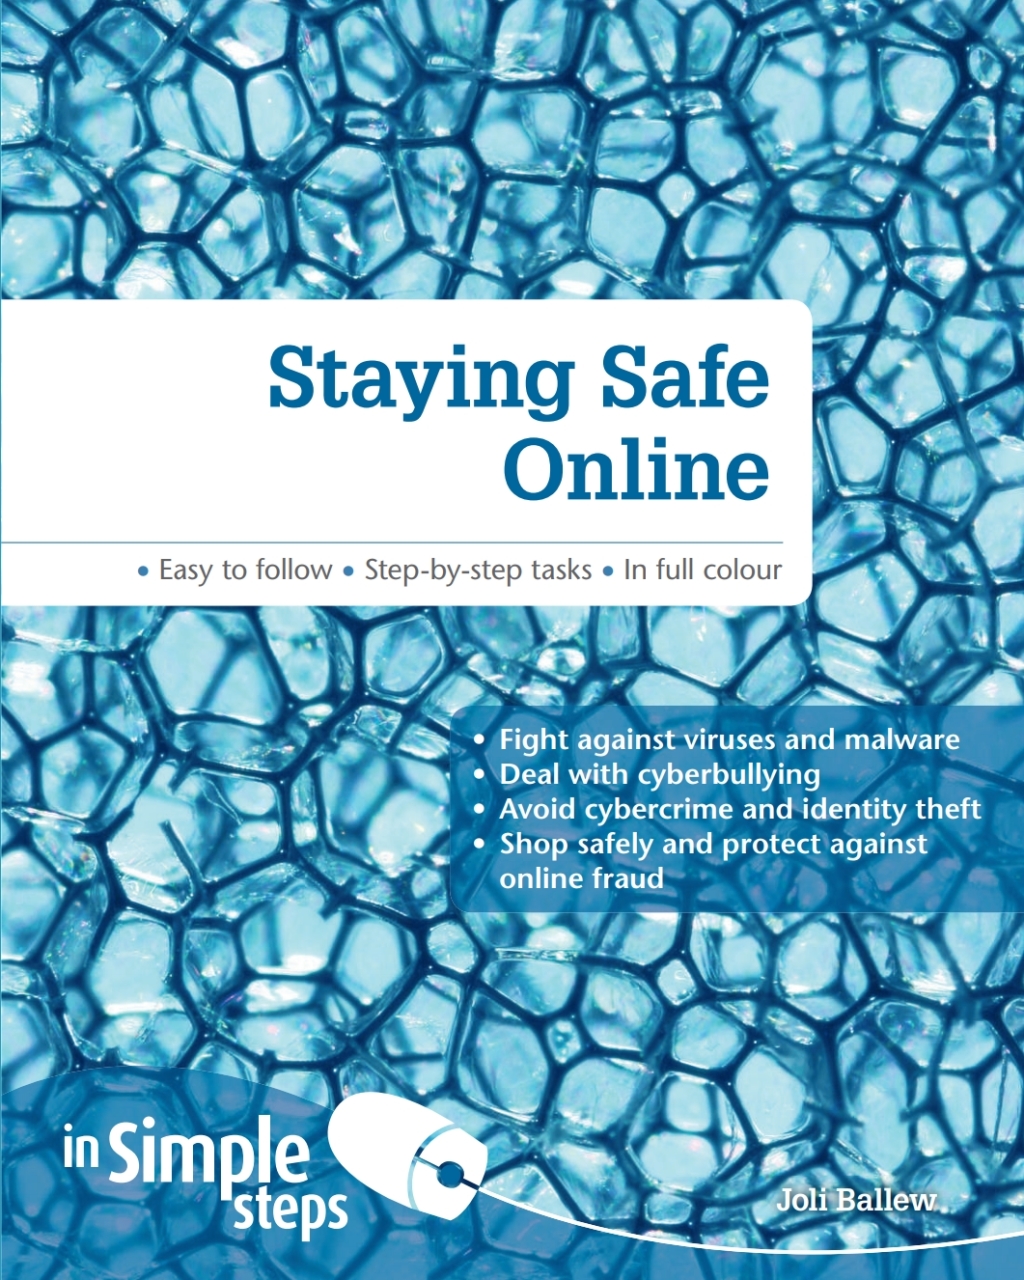 Staying Safe Online In Simple Steps eBook - 1st Edition (eBook)